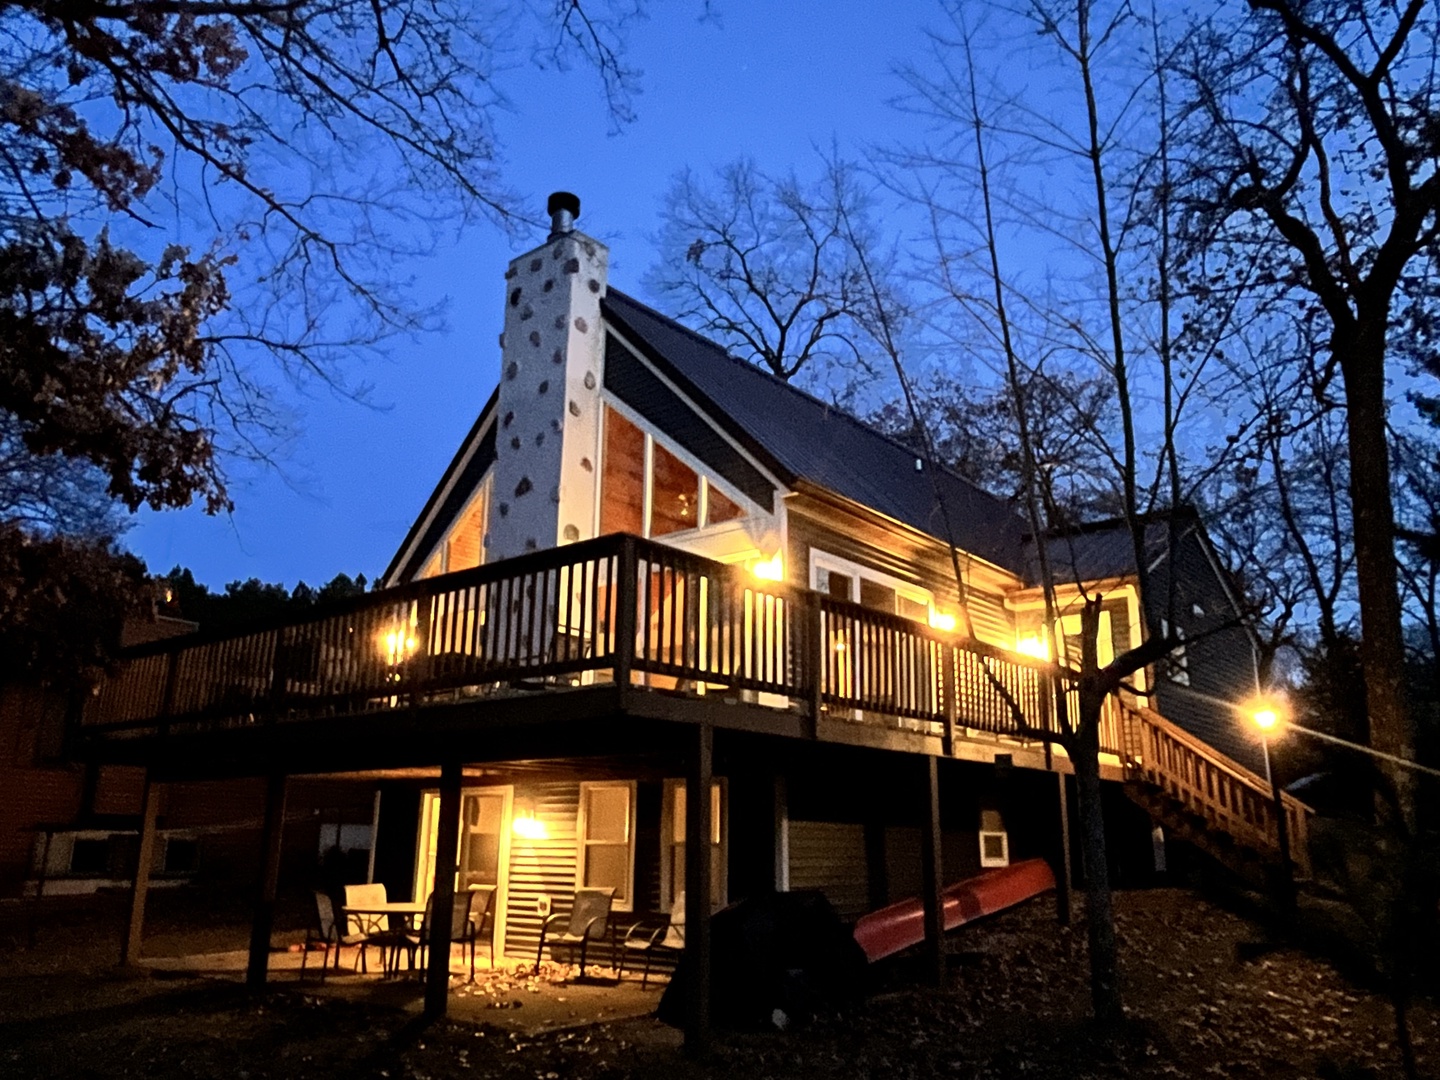 Elkhorn Lodge on Lake McGinnis 20% Off Rates Until May 20th